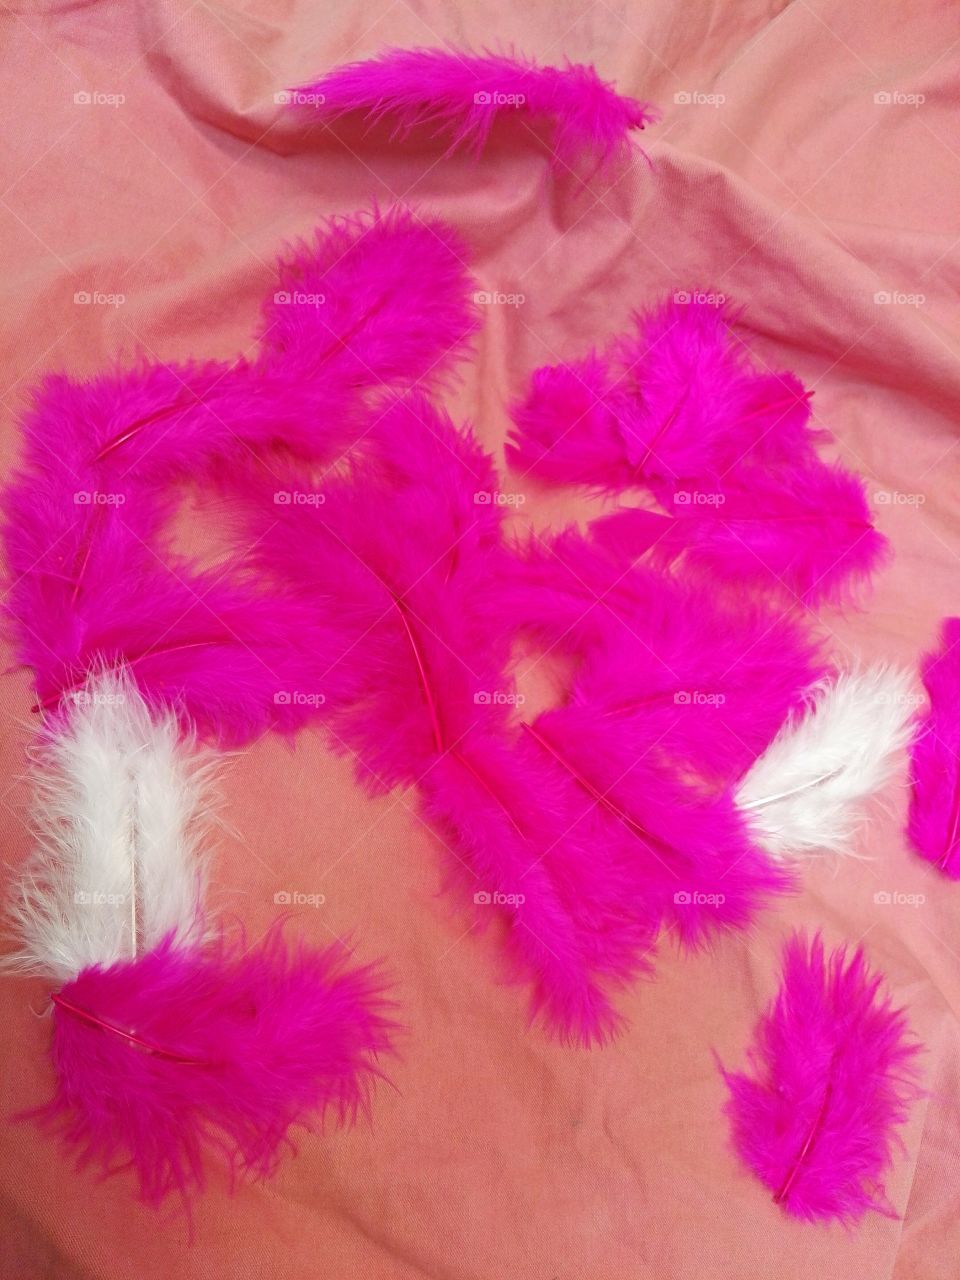 pink feathers on pink pillow